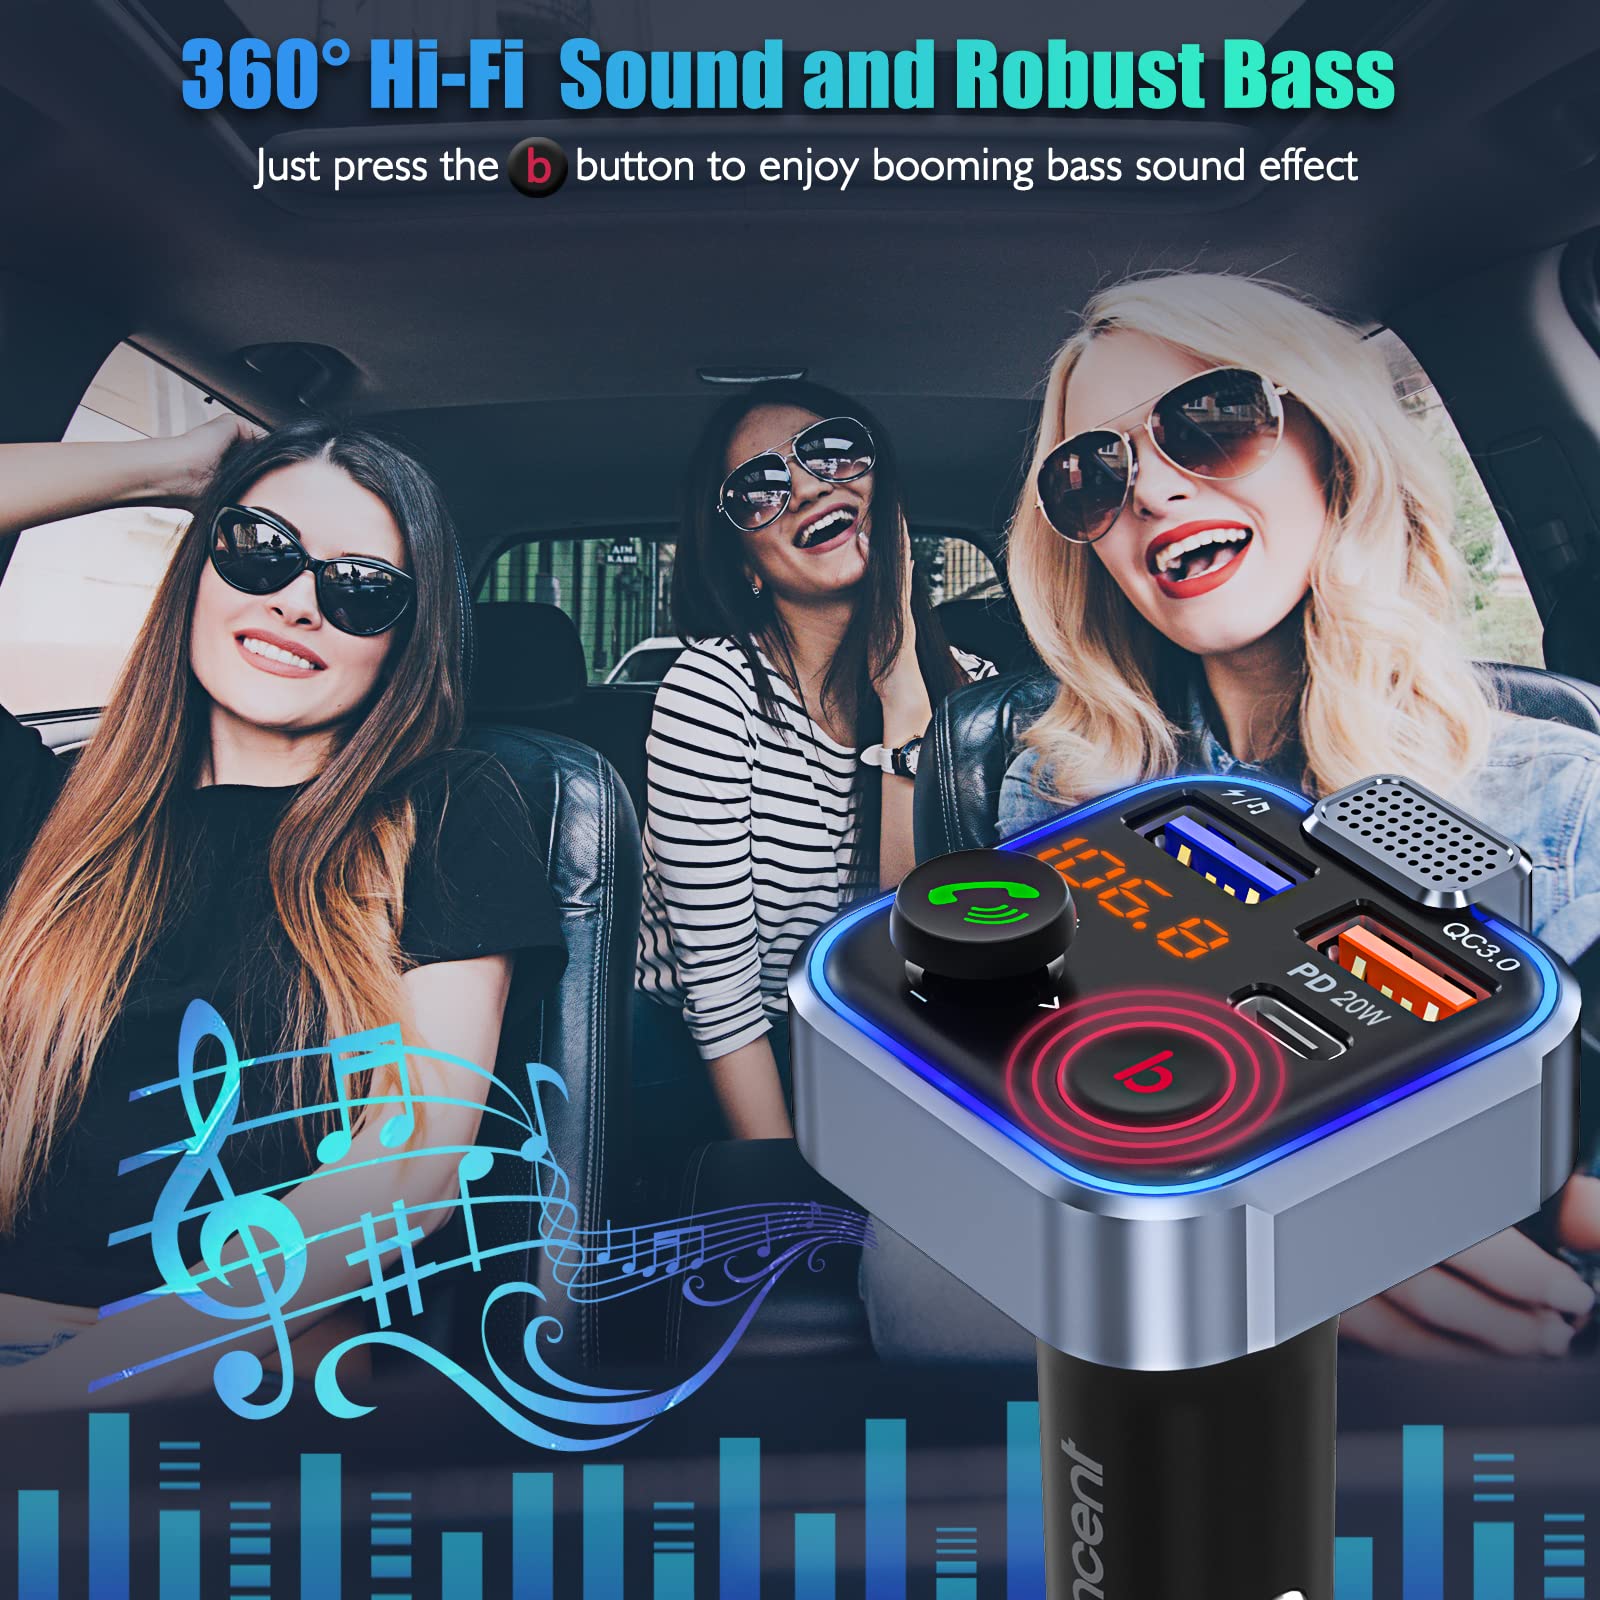 [2022 Version]LENCENT Car FM Transmitter, Wireless Bluetooth 5.0 Radio Adapter Car Kit, PD3.0 Type C 20W+QC3.0 Car Fast Charger, Hands Free Calling, Bass Lossless Hi-Fi Sound Support U Disk